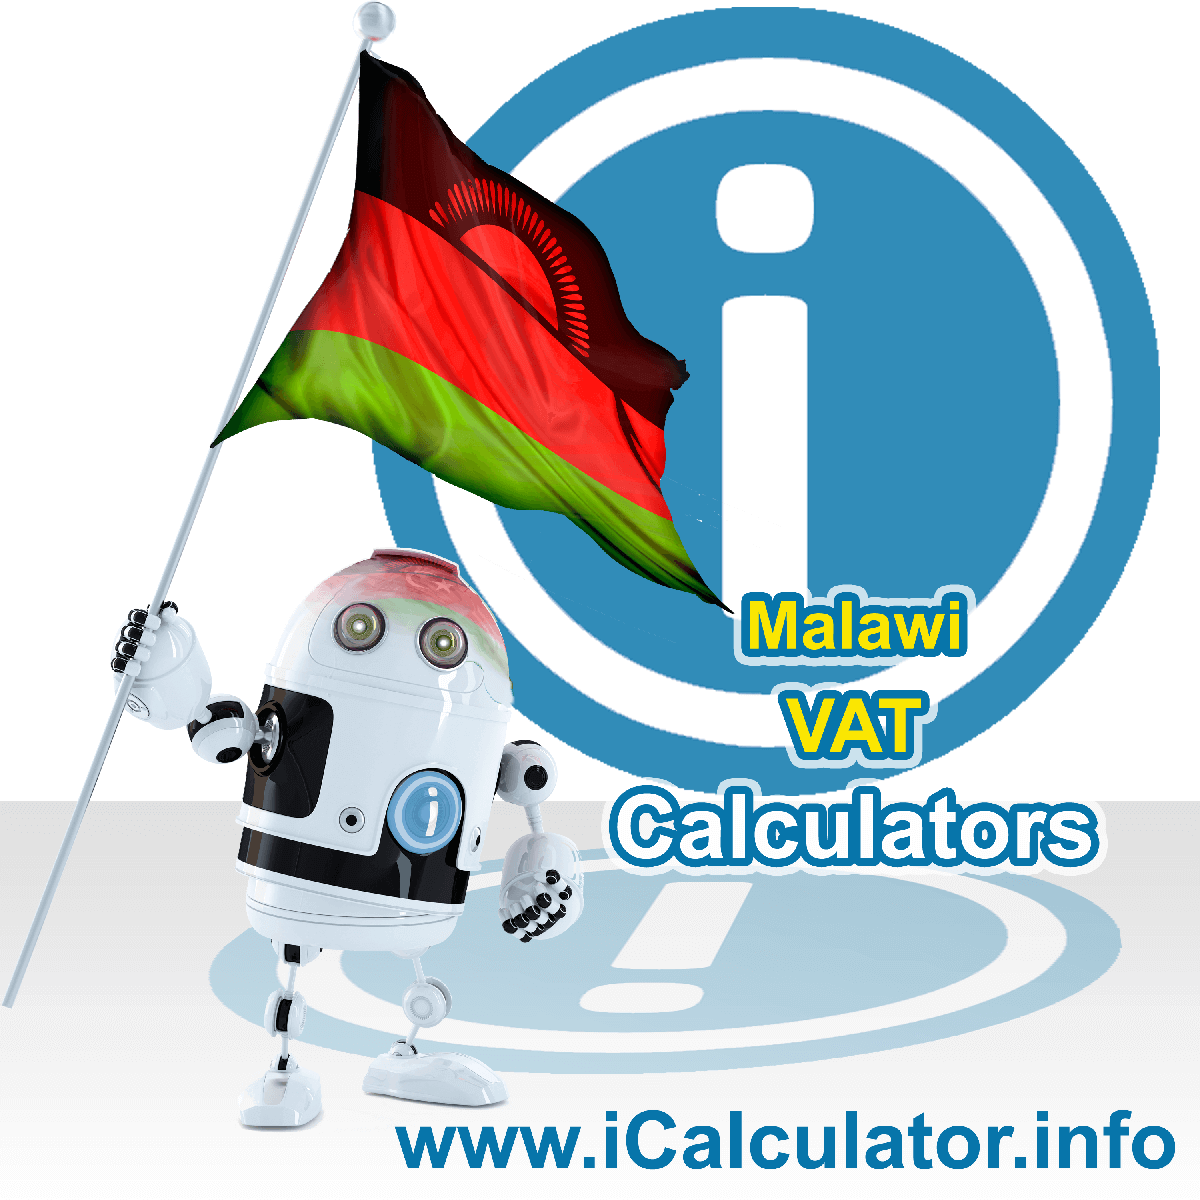 Malawi VAT Calculator. This image shows the Malawi flag and information relating to the VAT formula used for calculating Value Added Tax in Malawi using the Malawi VAT Calculator in 2023